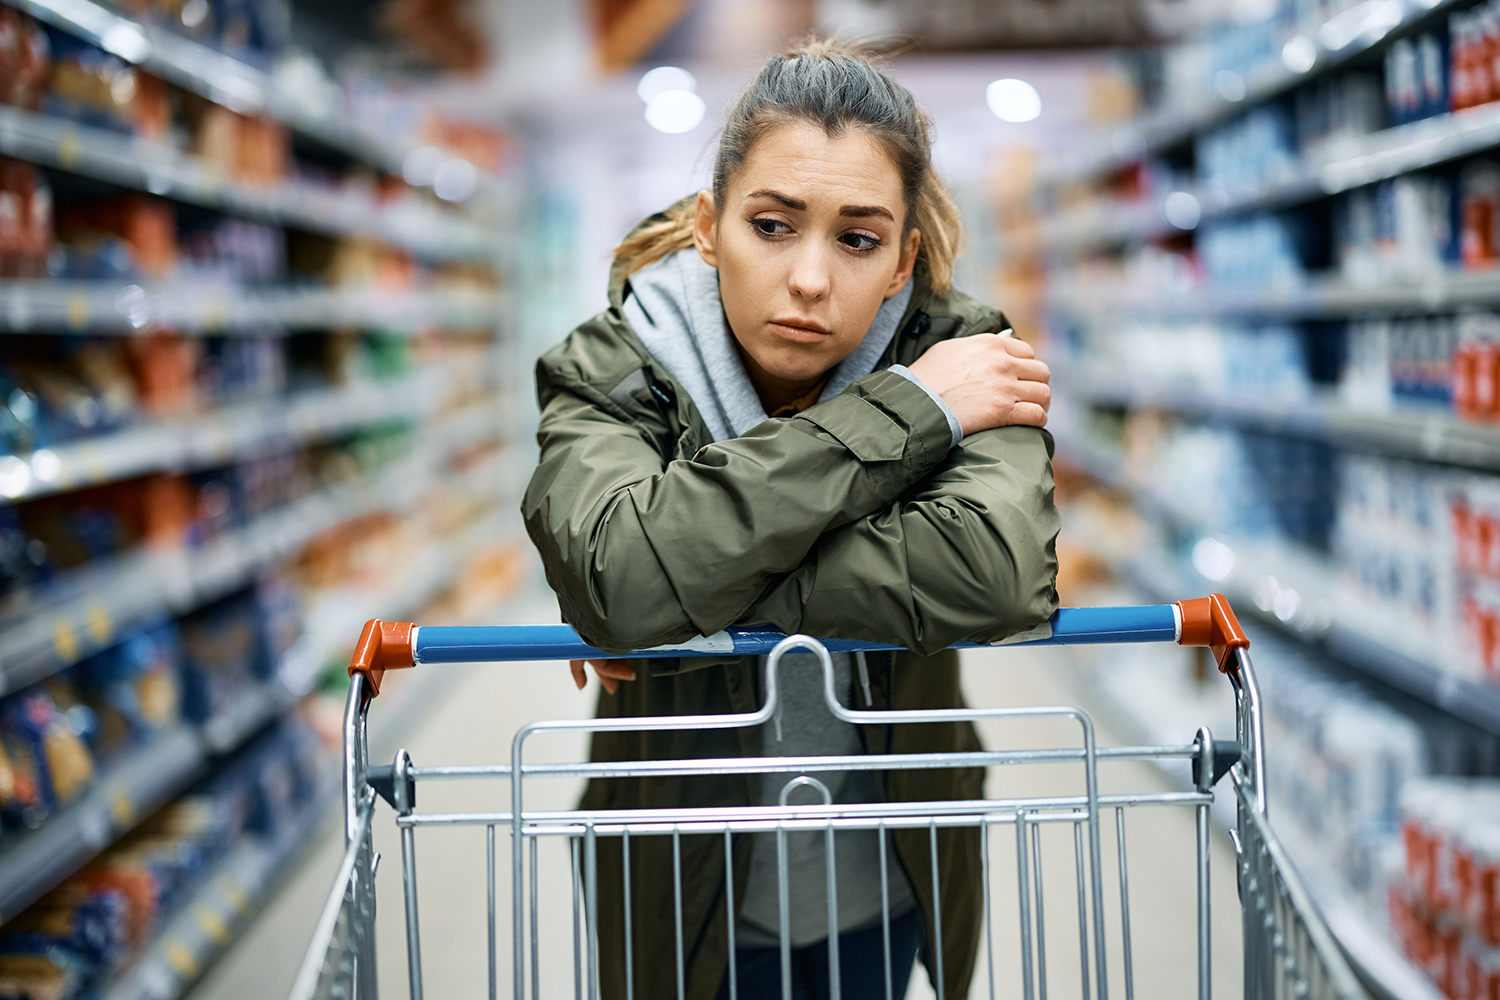 Young woman shopping in grocery store, leaning on cart